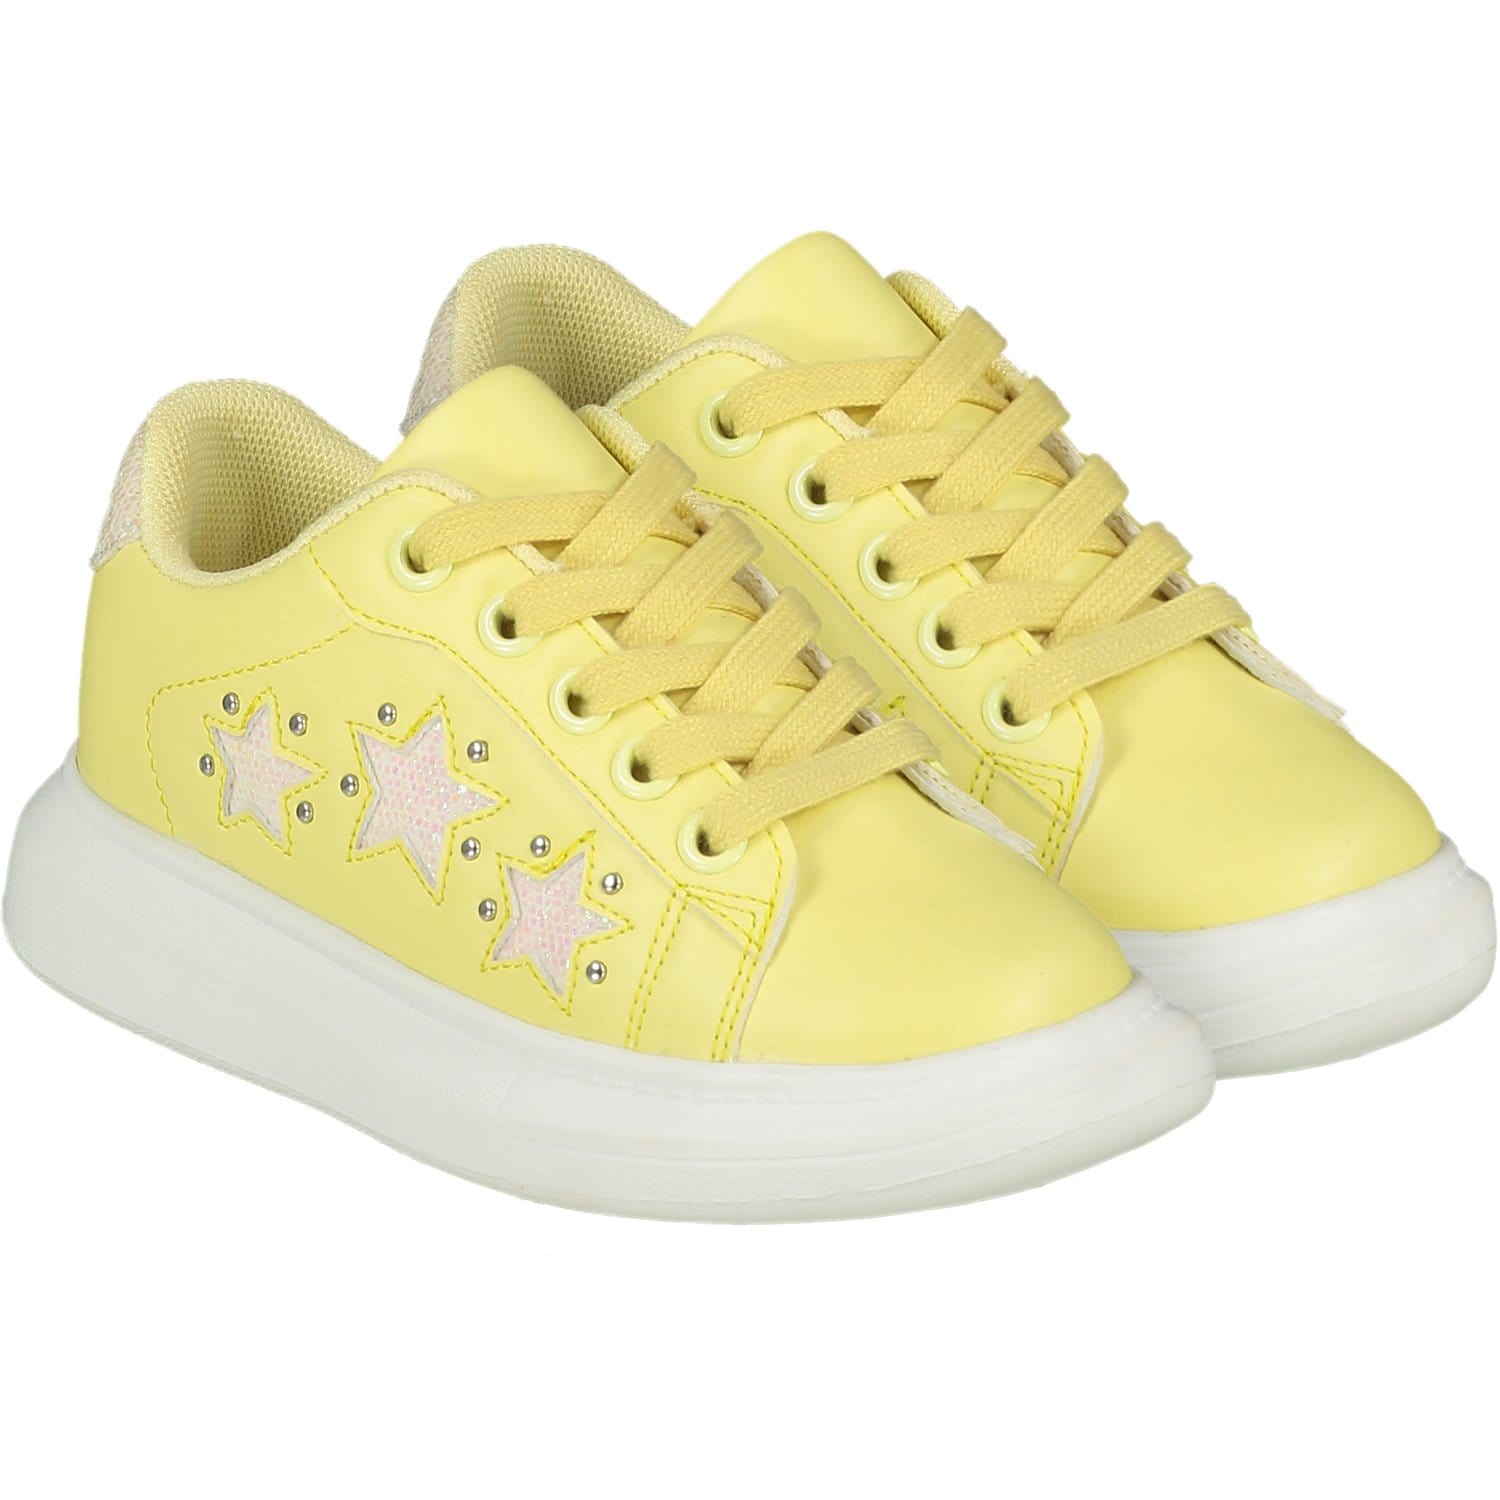 A DEE - Queeny Chunky Star Trainer - Lemon